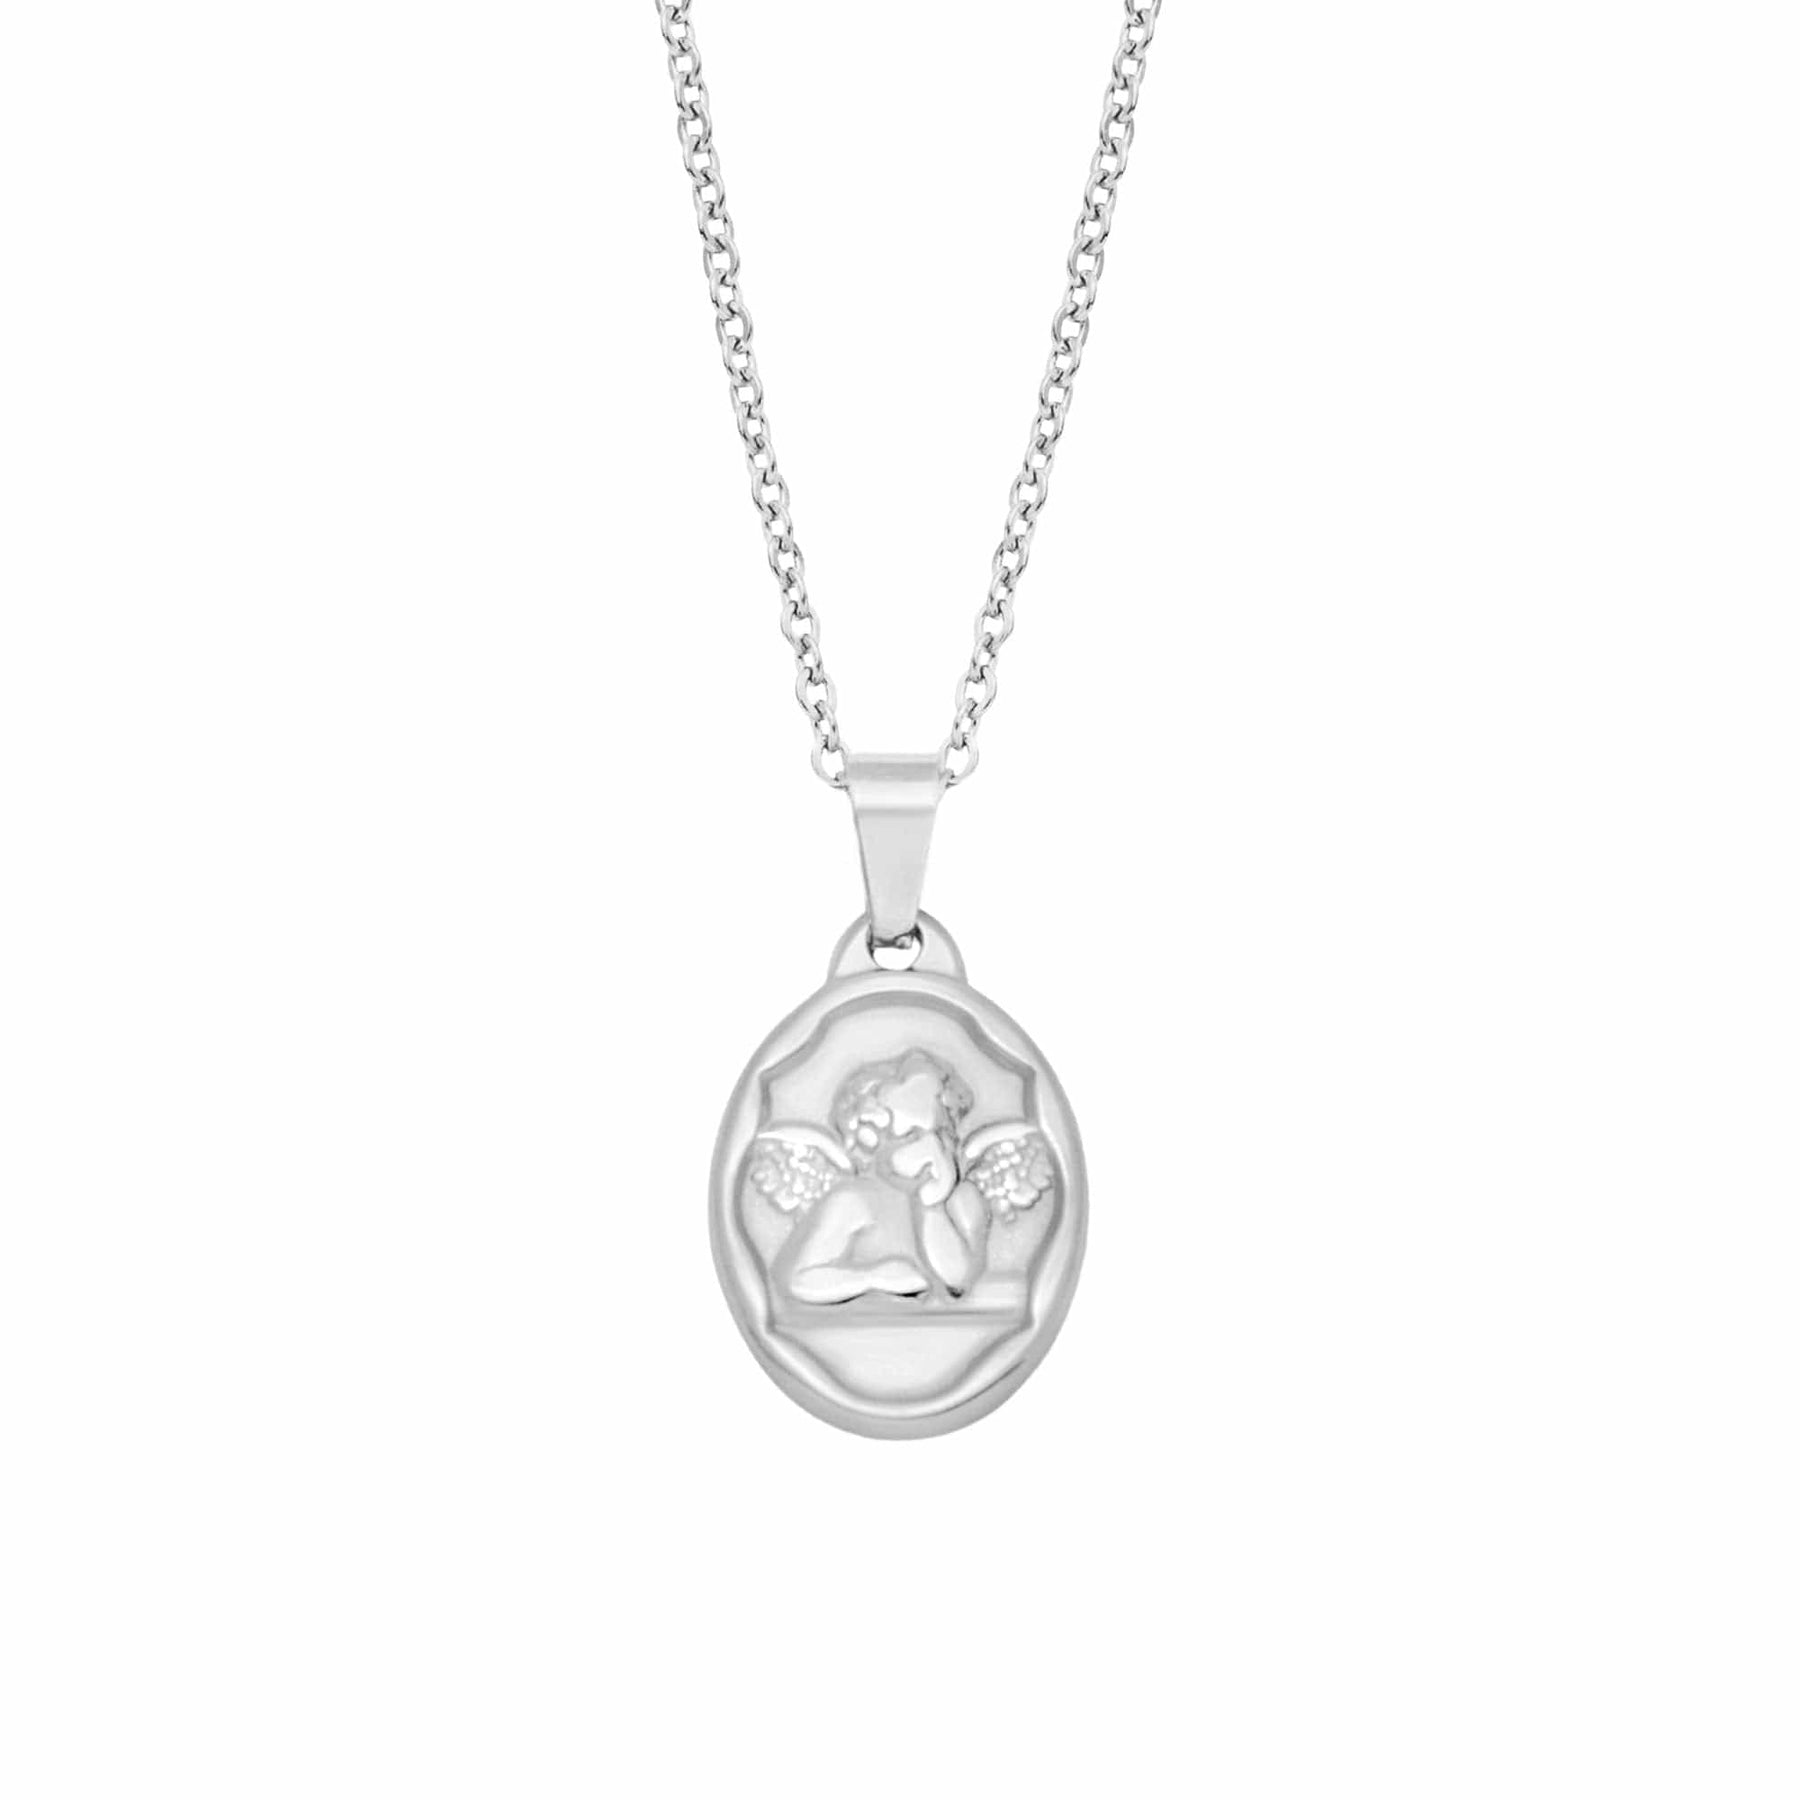 BohoMoon Stainless Steel Cupid Necklace Silver